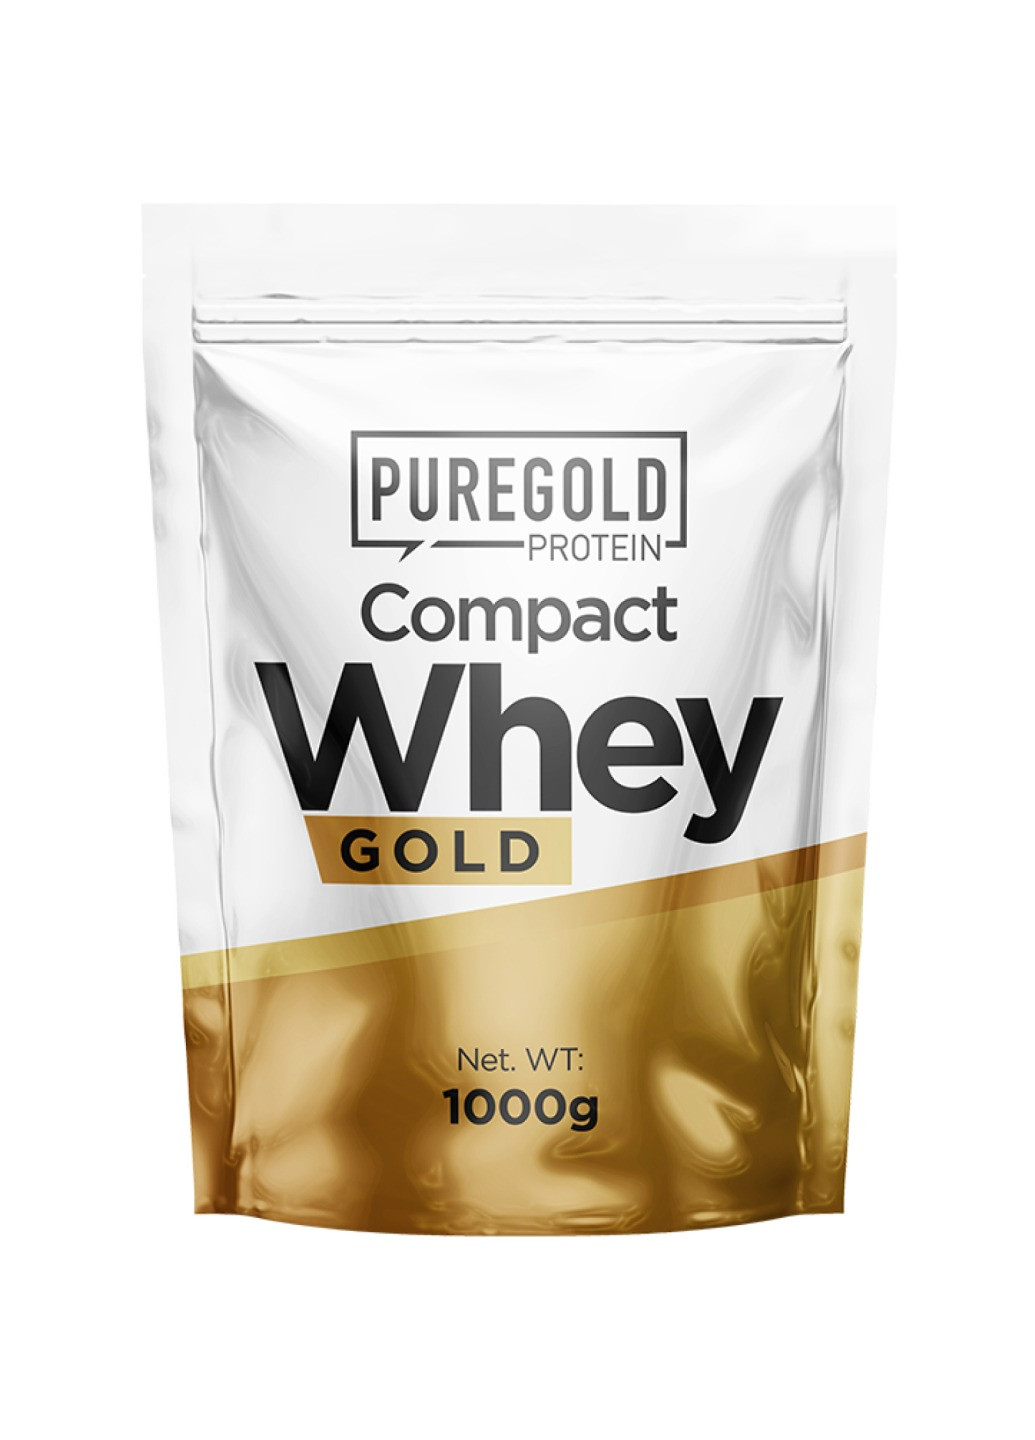 Протеин Compact Whey Gold - 1000g Pina Colada Pure Gold Protein (270007911)